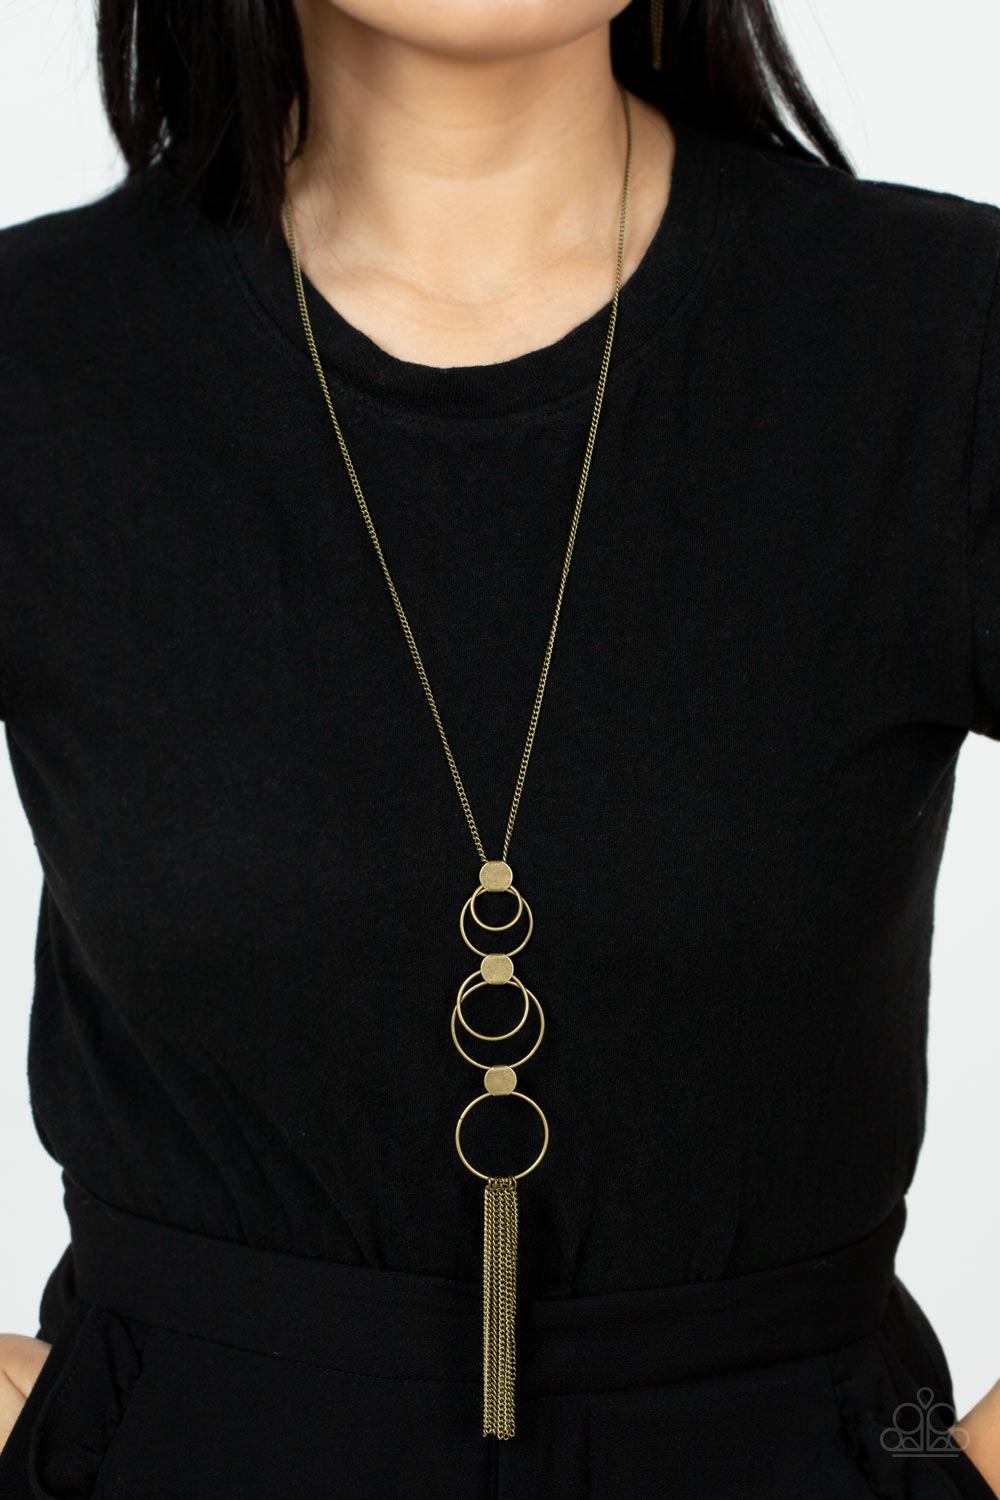 Join The Circle - Brass Necklace - Paparazzi Accessories